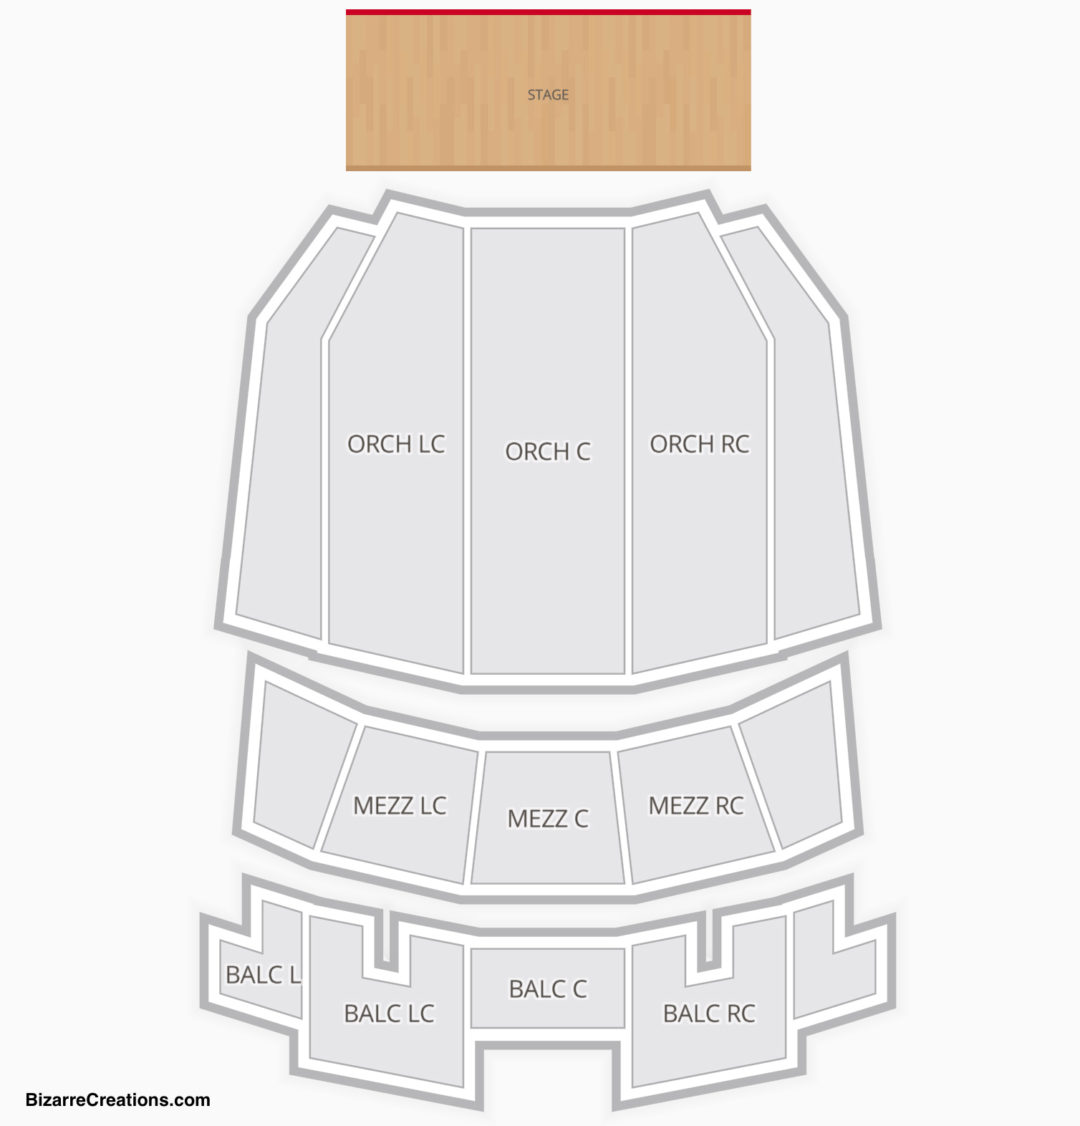 Ovens Auditorium Charlotte Nc Seating Chart With Seat Number